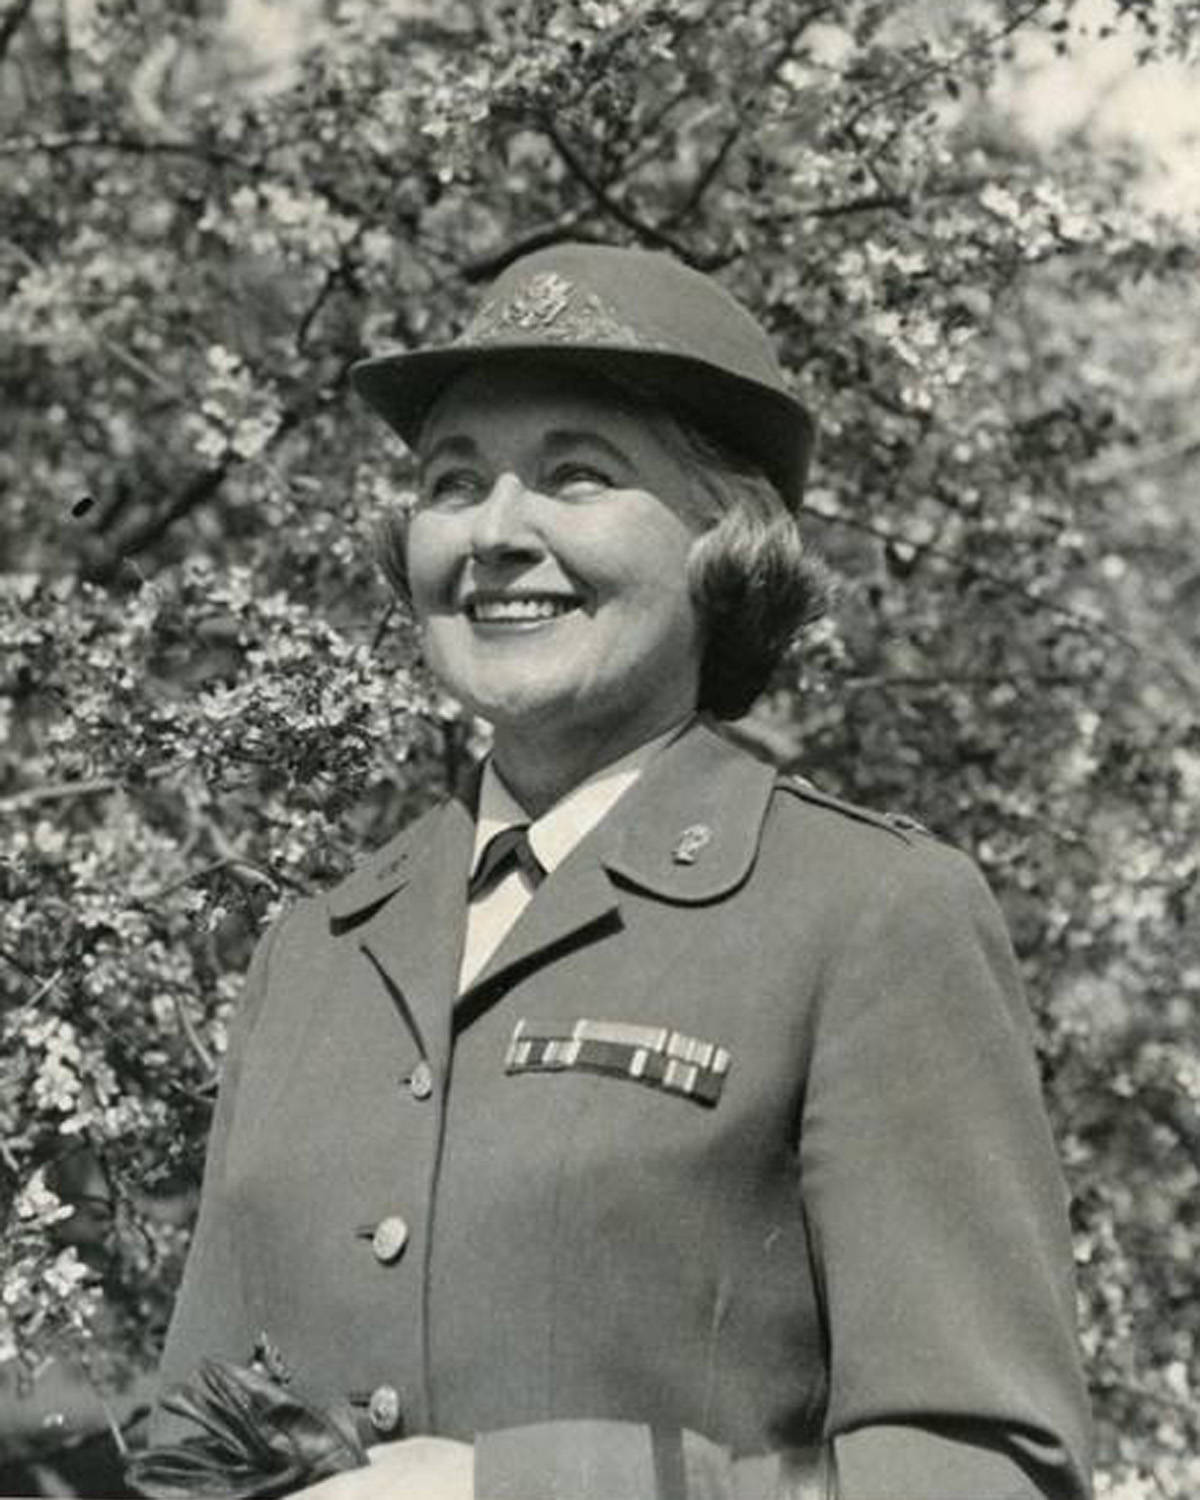 Col. Mary Louise Milligan Rasmuson was the fifth commander of the Women’s Army Corps and oversaw the integration of the service. On Nov. 9, 2020, Operation Mary Louise, named in her honor, was stood up to enhance visibility and access to services for women veterans in Alaska. (Courtesy Photo / Rasmuson Foundation)